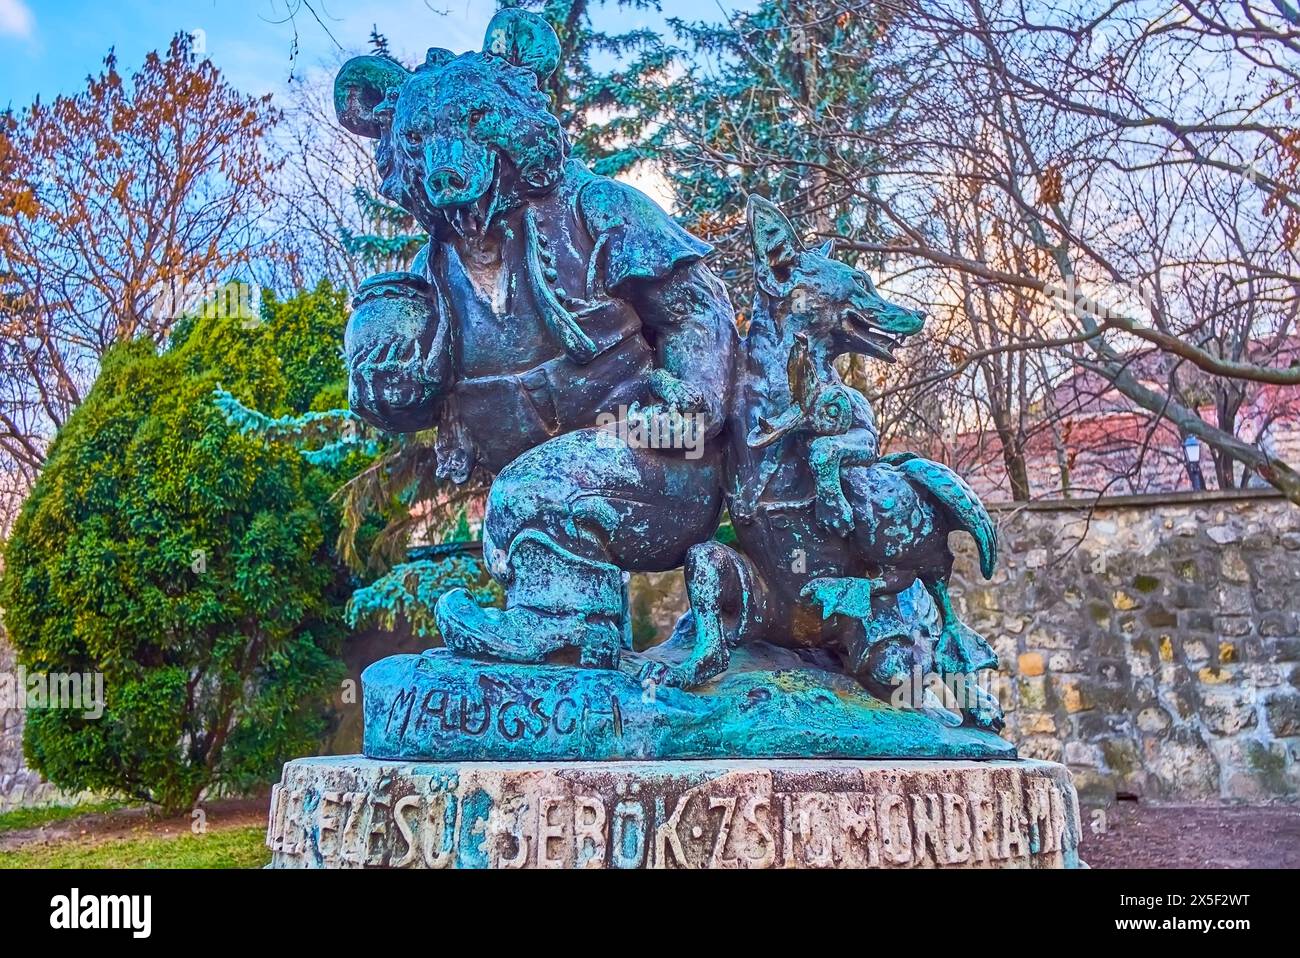 BUDAPEST, HUNGARY - MARCH 3, 2022: The bronze sculpture by Gyula Maugsch, depicting Zsigmond Sebok's fairy tale characters - bear, fox and goose, Buda Stock Photo